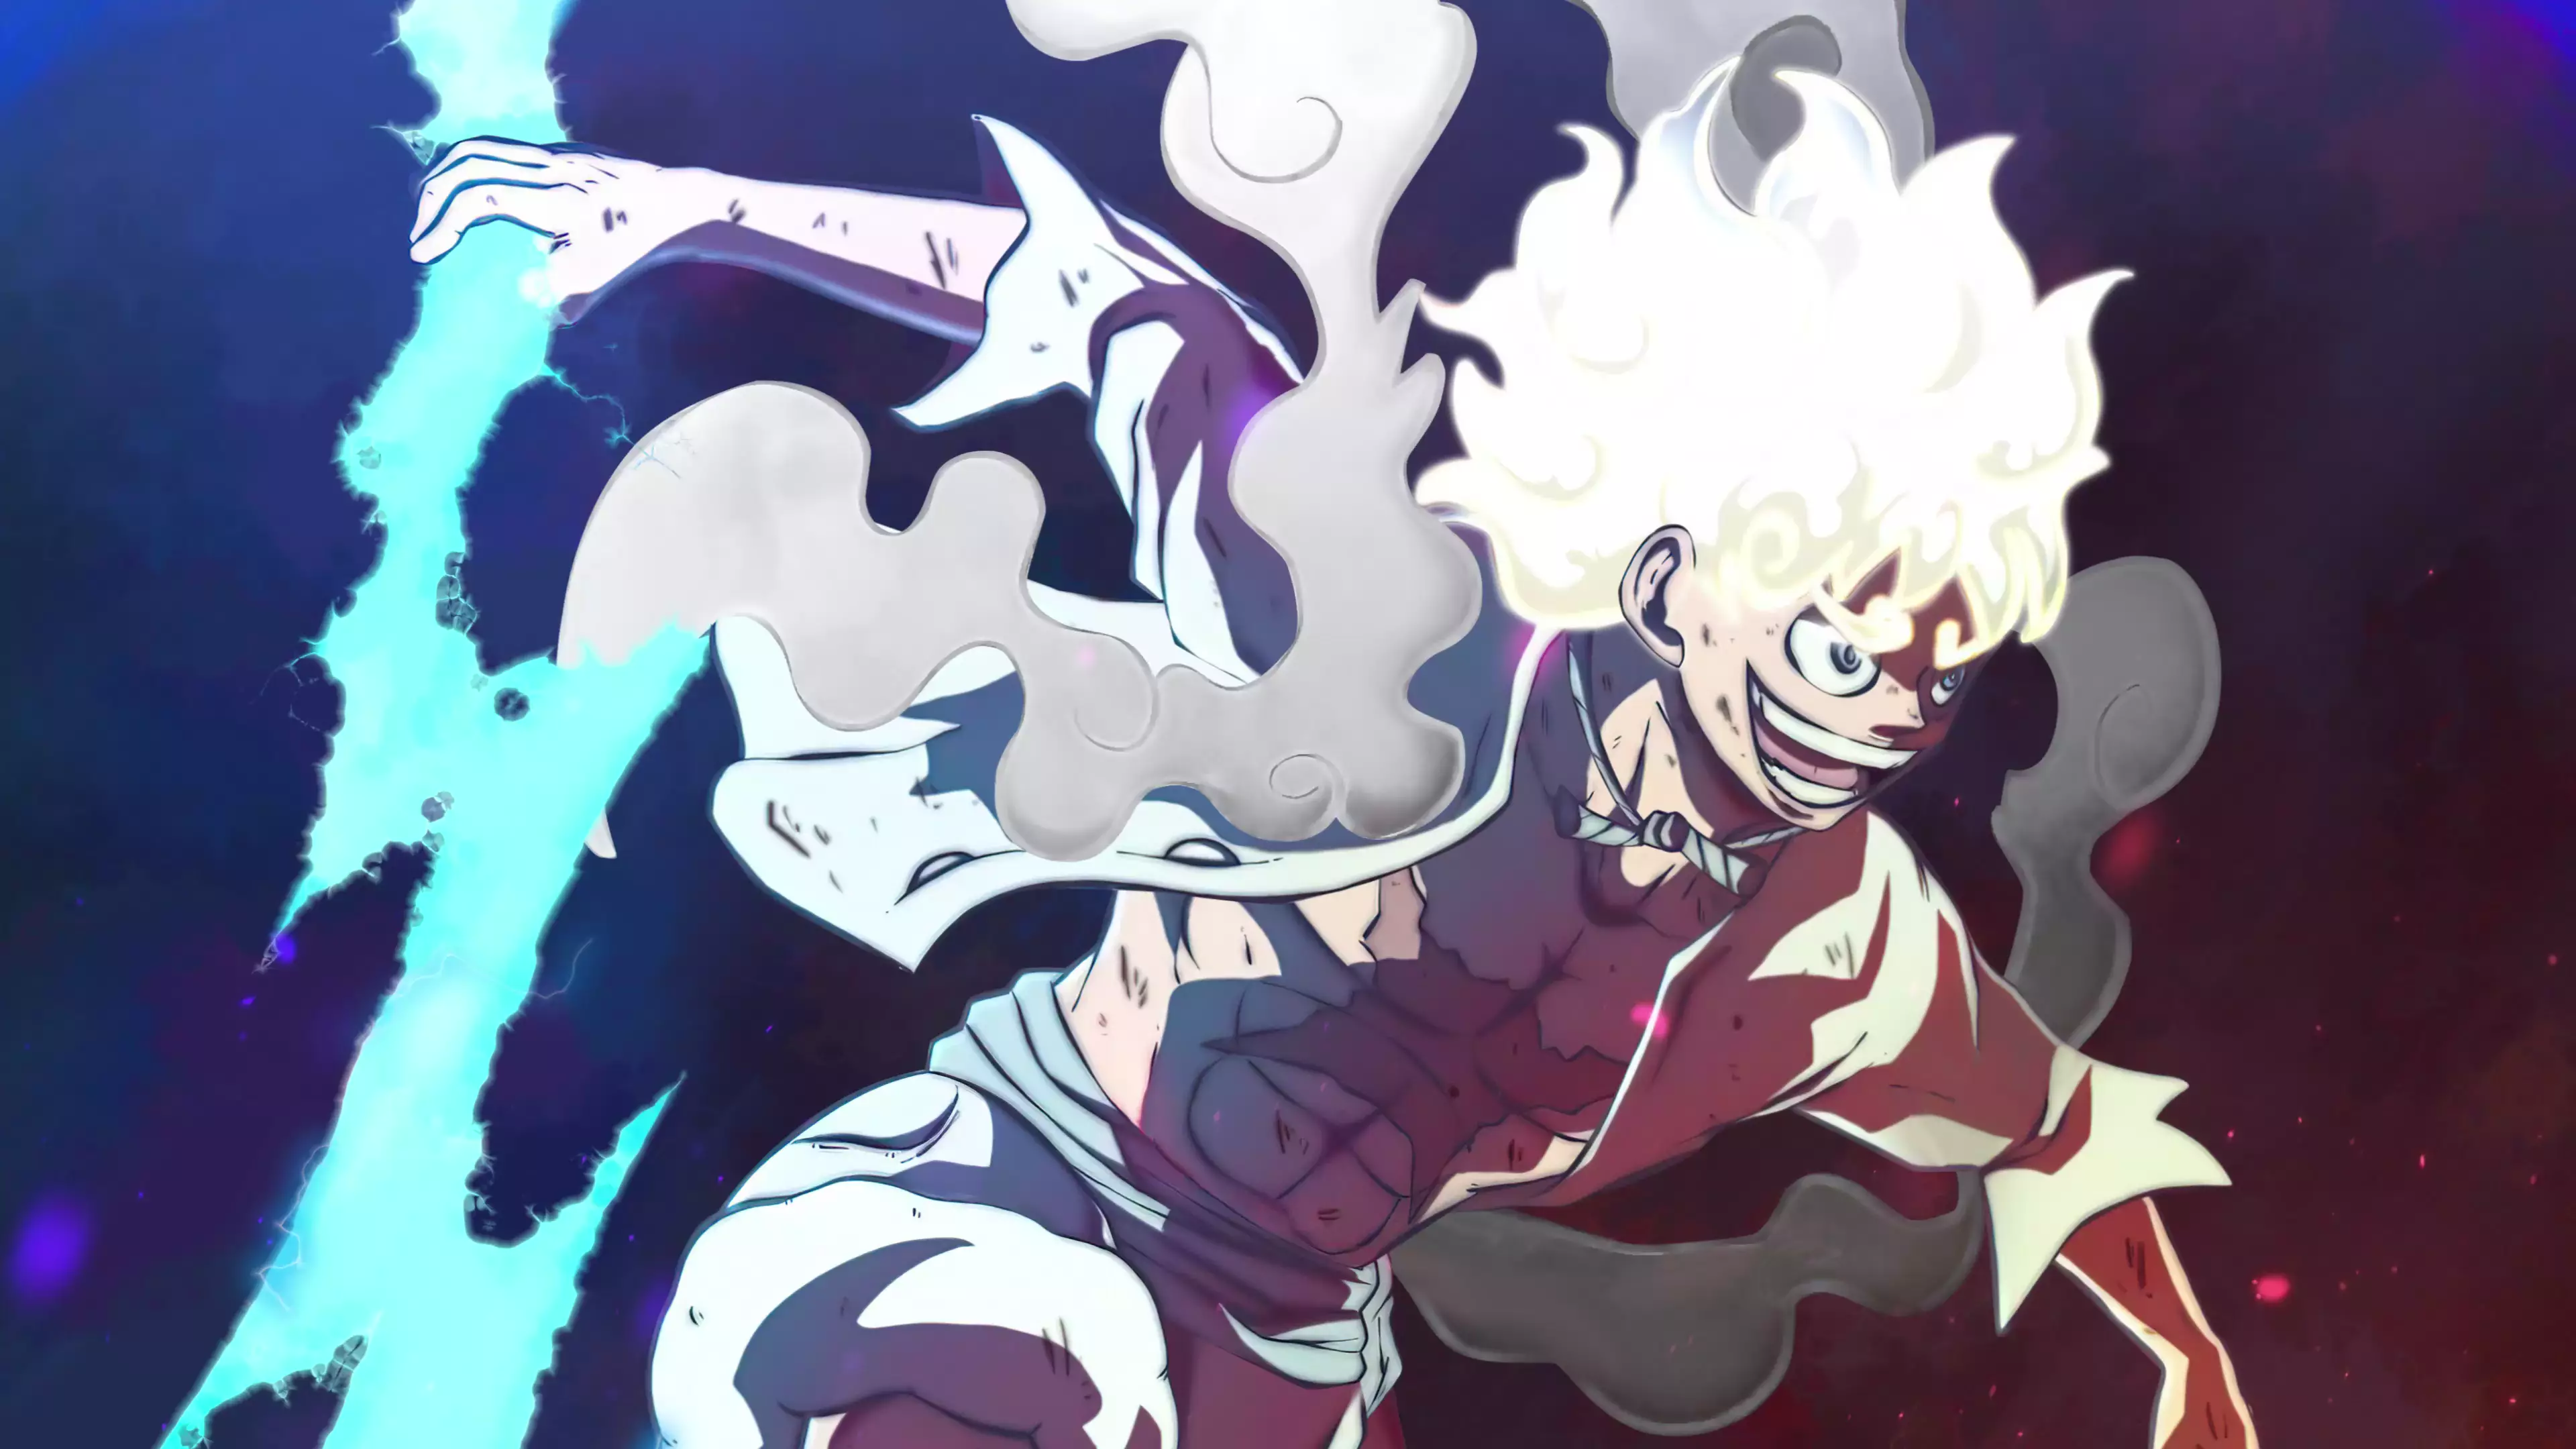 Video wallpaper Luffy Gear 5 with holding cybust lighting - One Piece (Anime )